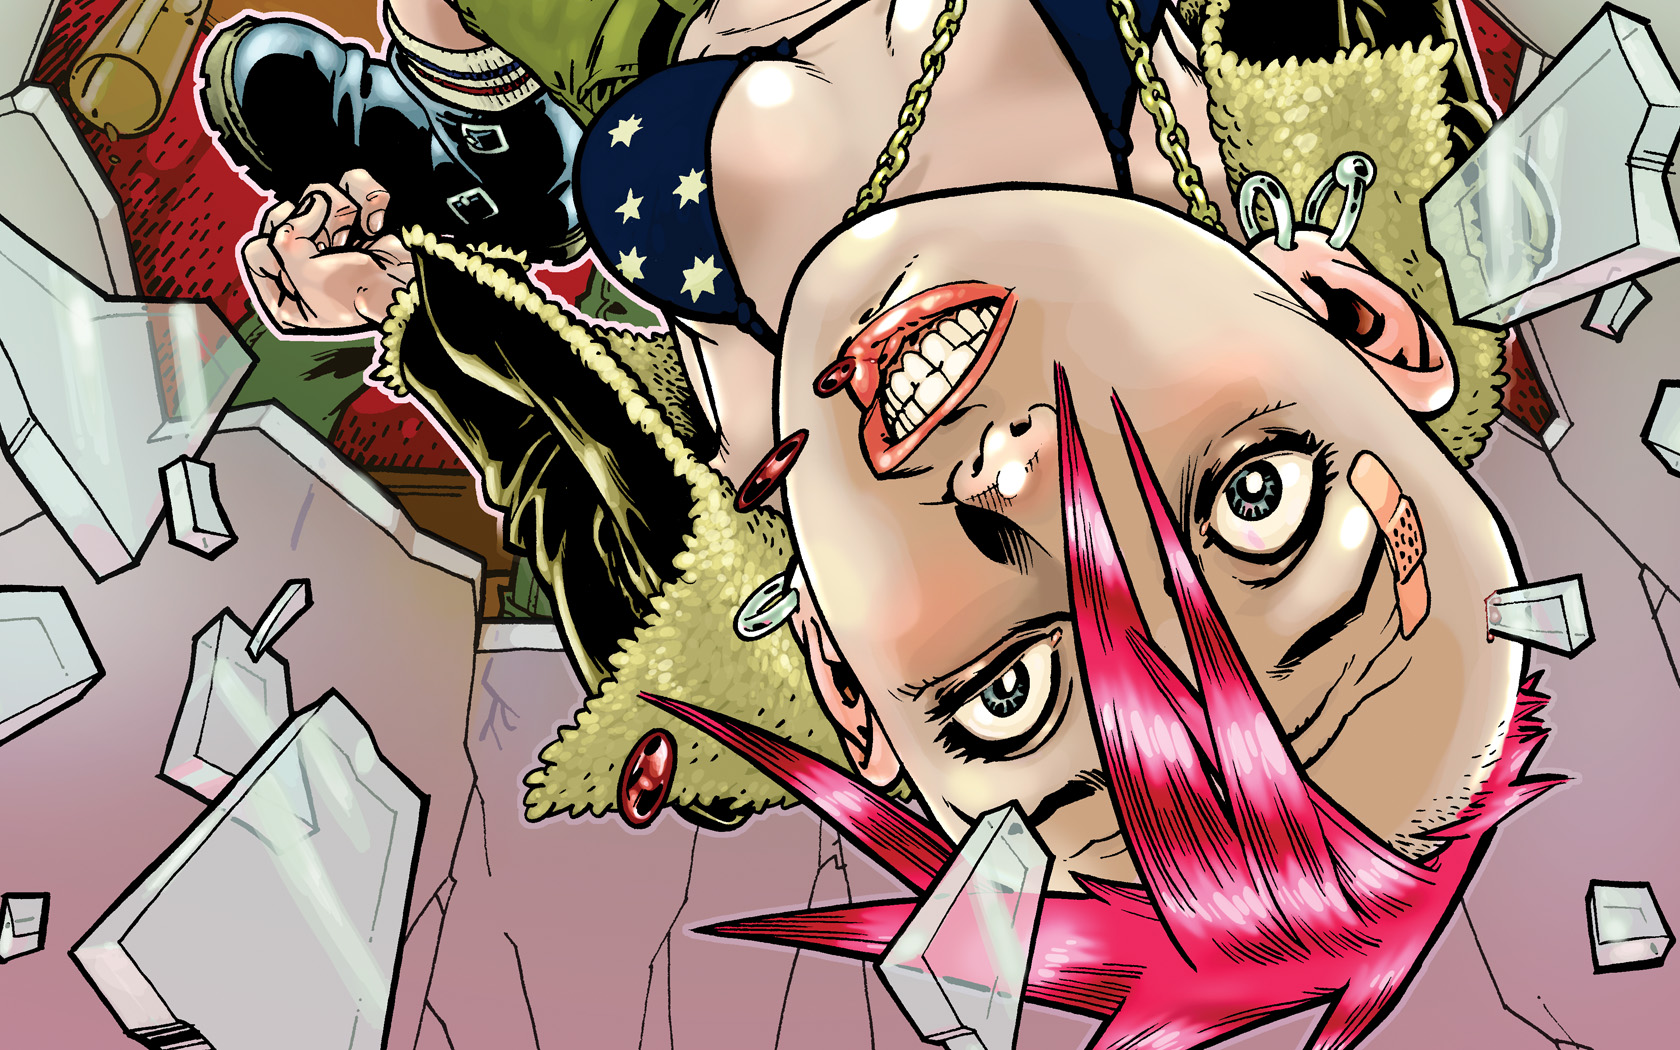 Can't believe Phil Bond posted new TANK GIRL art on Flickr and I hadn't noticed.